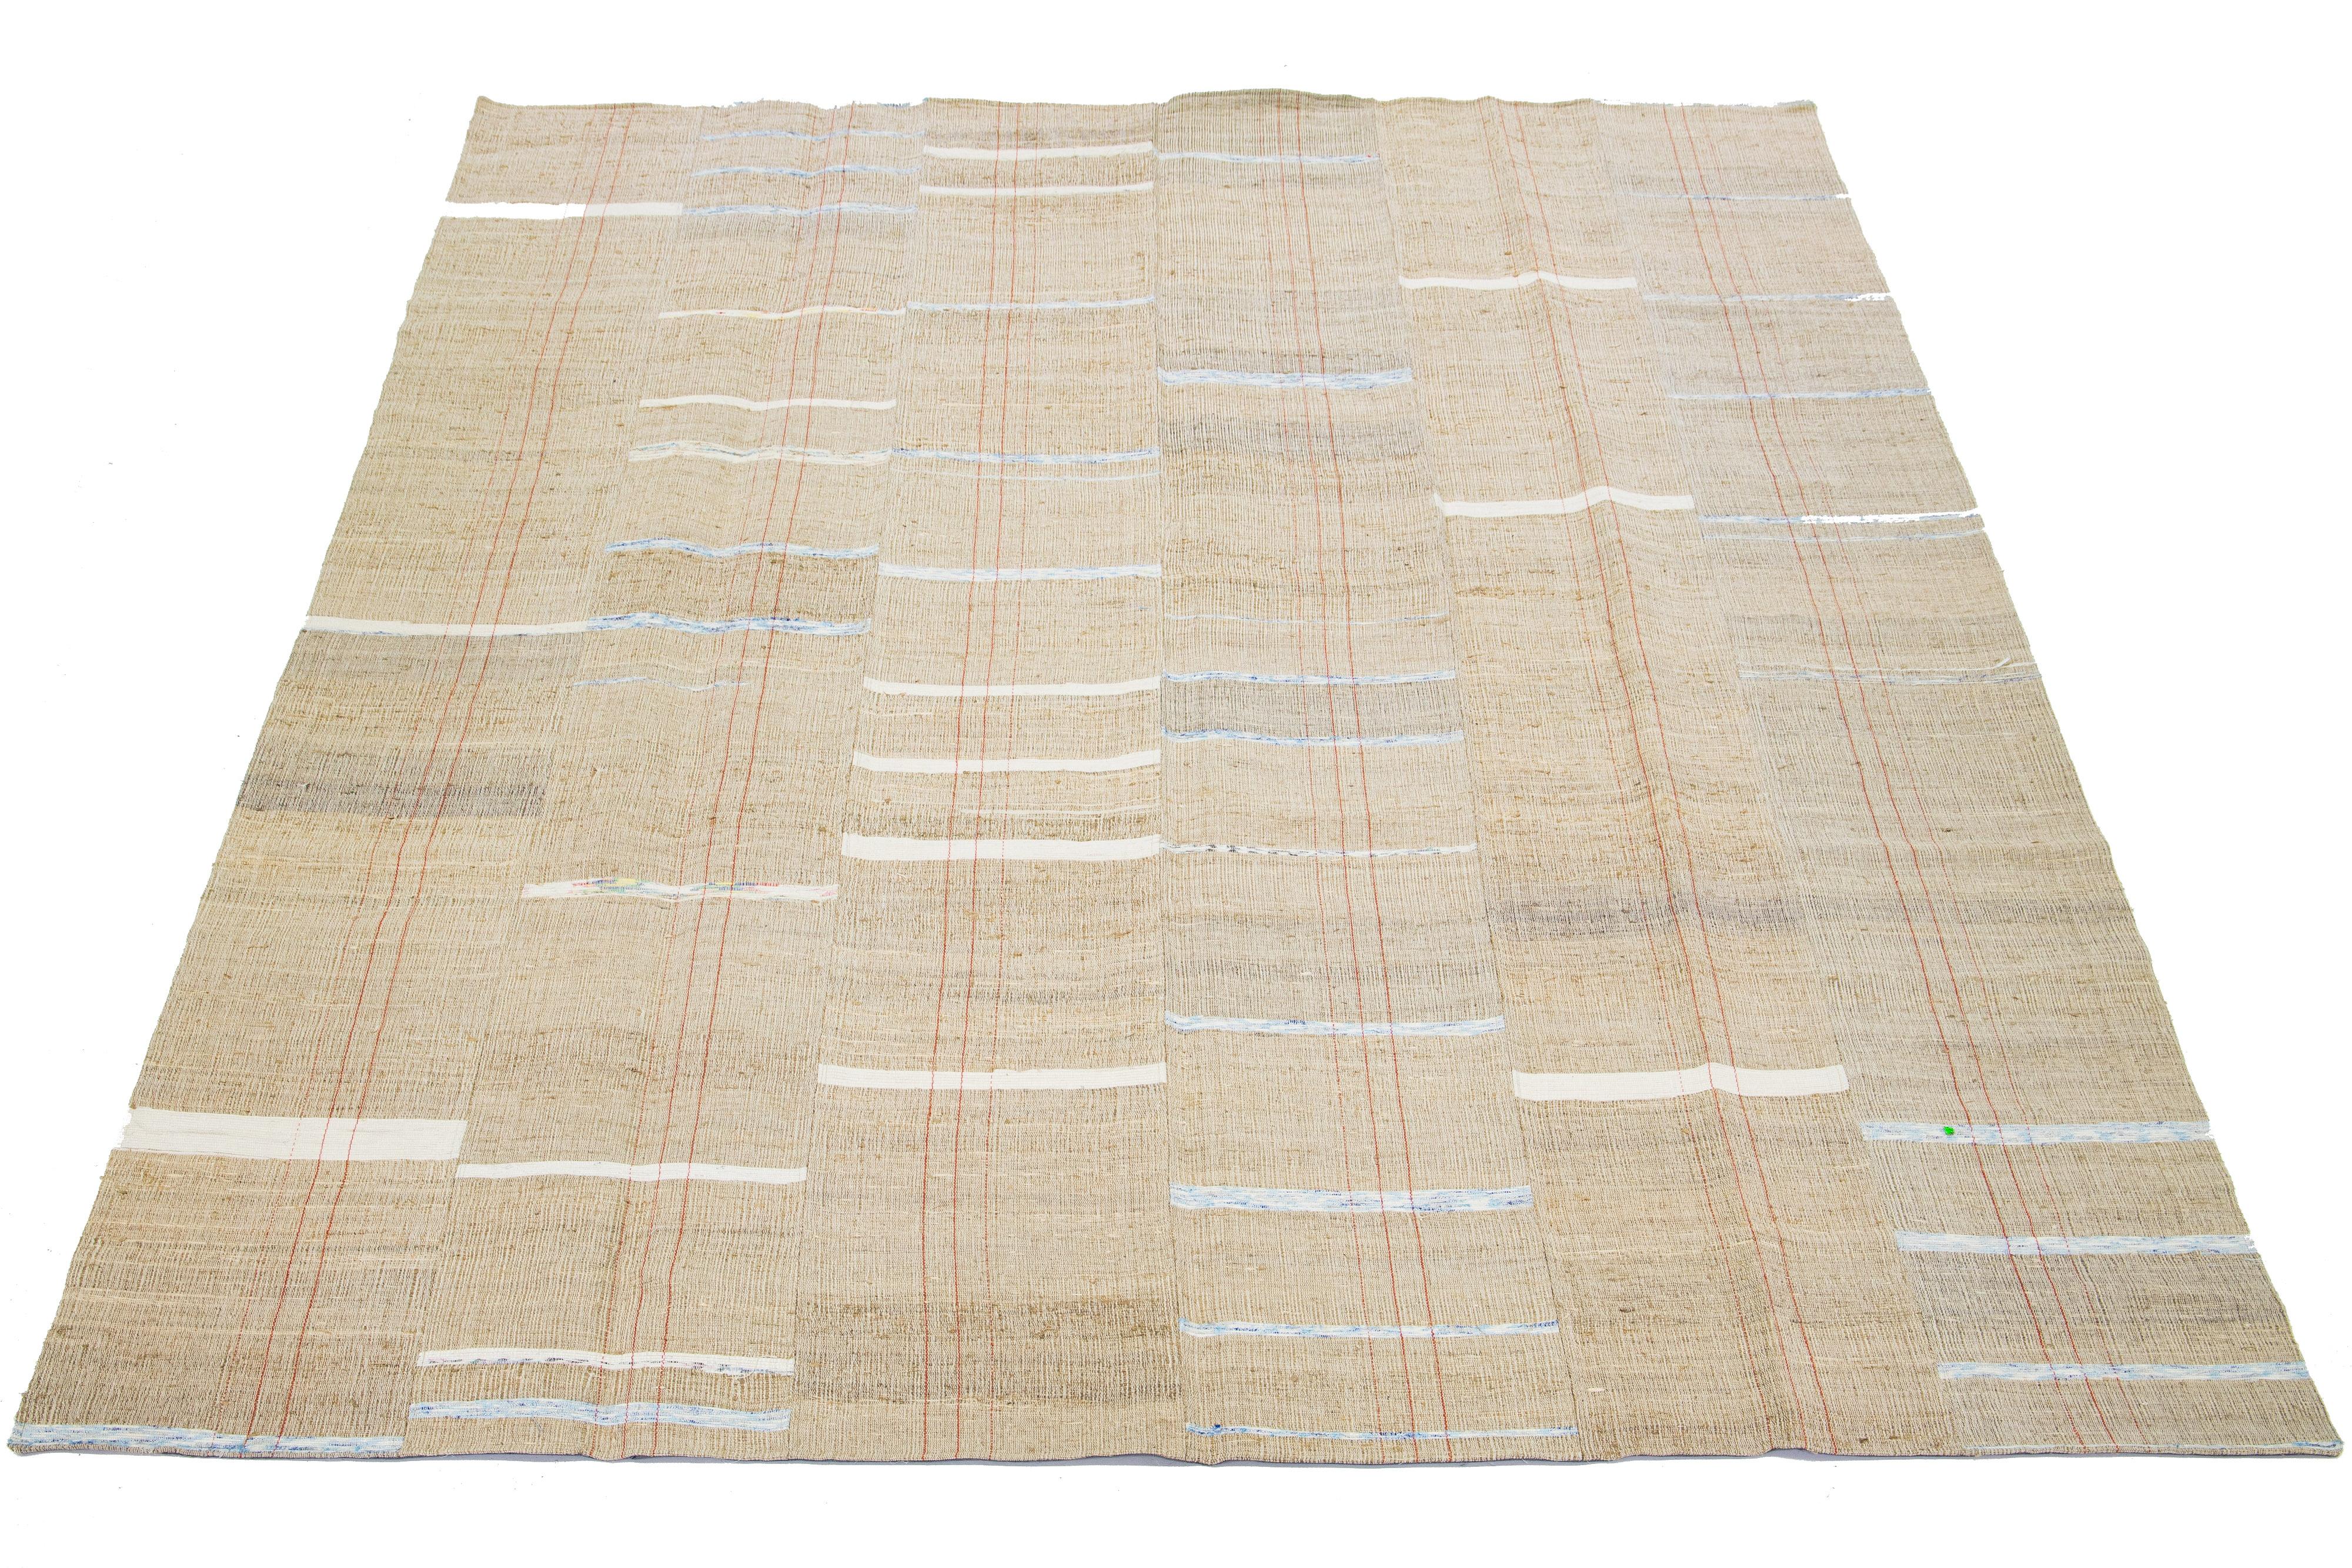 This Indian rug showcases a contemporary Kilim flatweave style crafted from wool. The rug has a beige field with a striped pattern in white, blue, and rust shades.

This rug measures 9'1